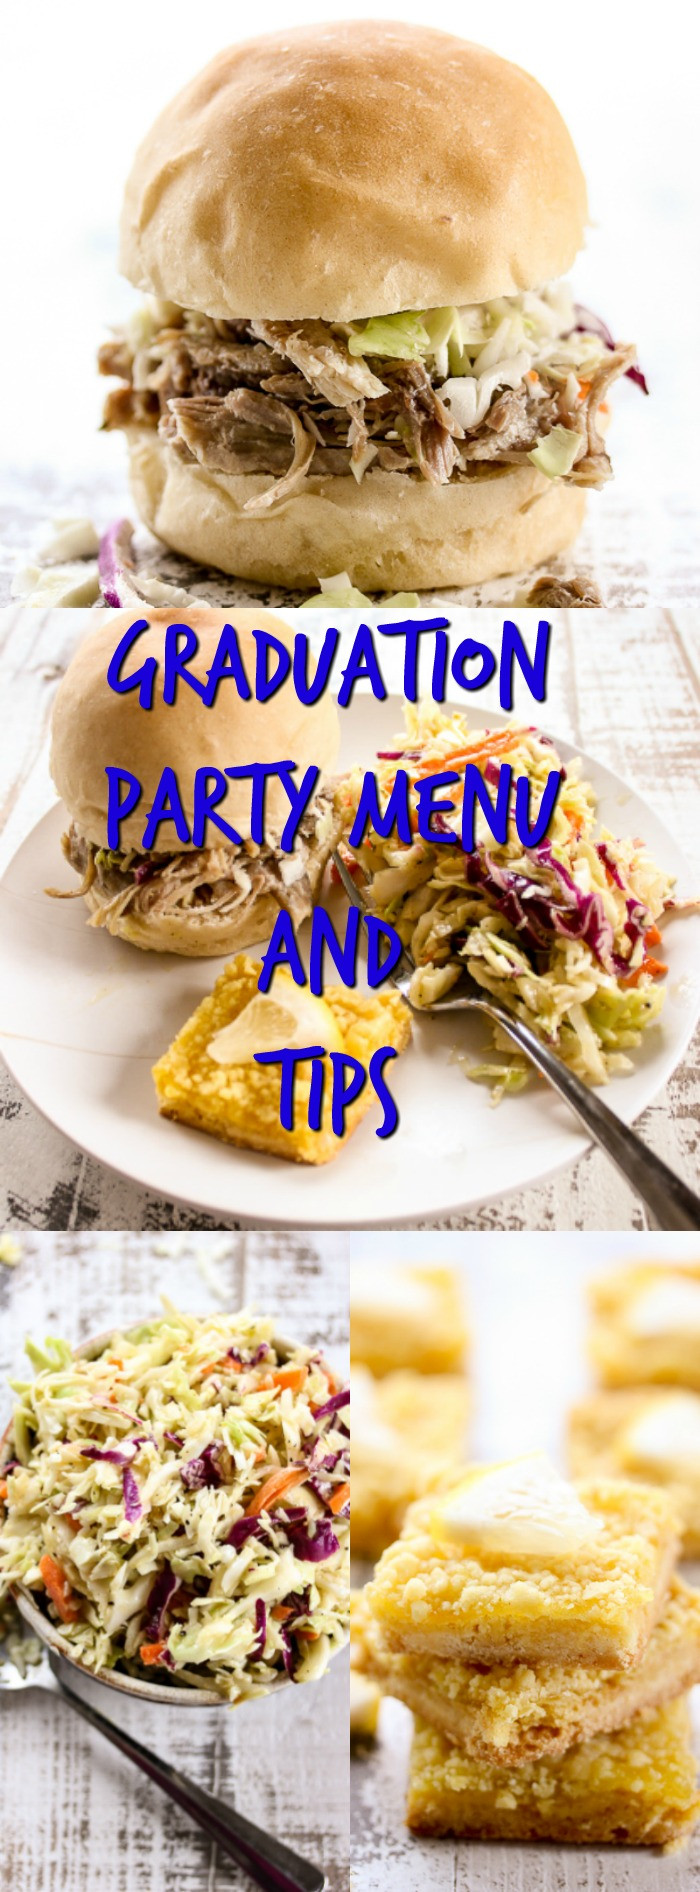 Food For Graduation Party Ideas
 Graduation Party Menu and Tips Lisa s Dinnertime Dish